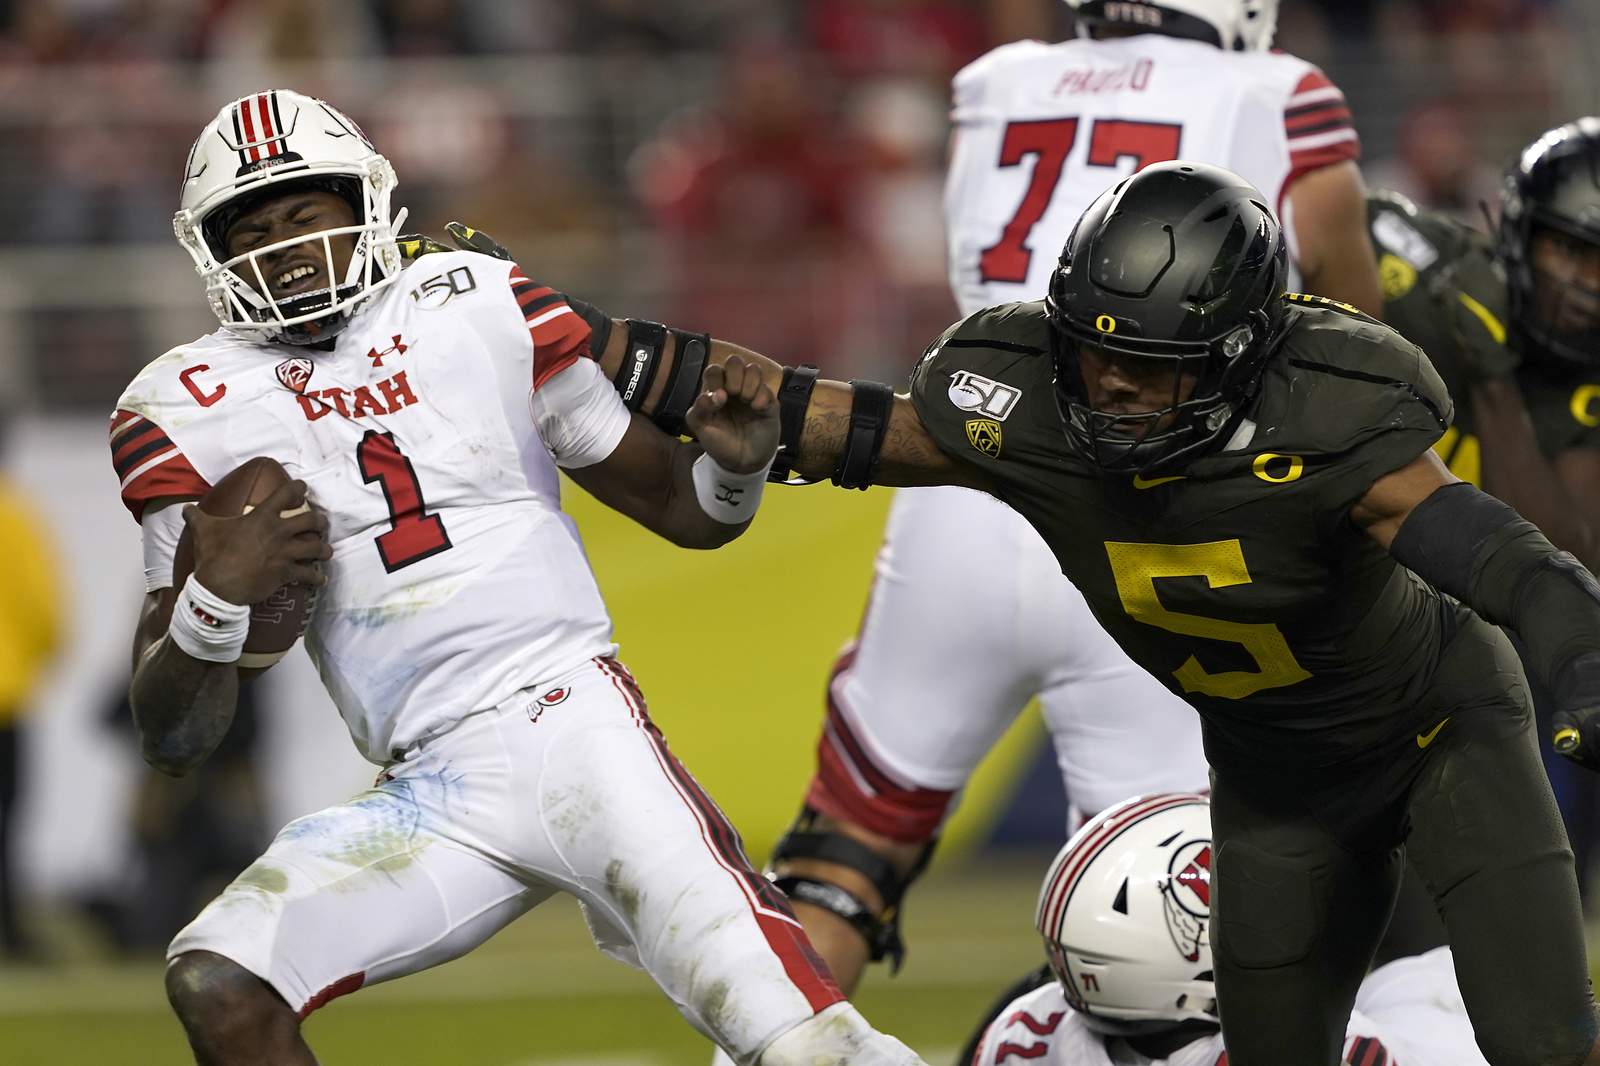 'Game-changer': Rapid, daily virus testing coming to Pac-12